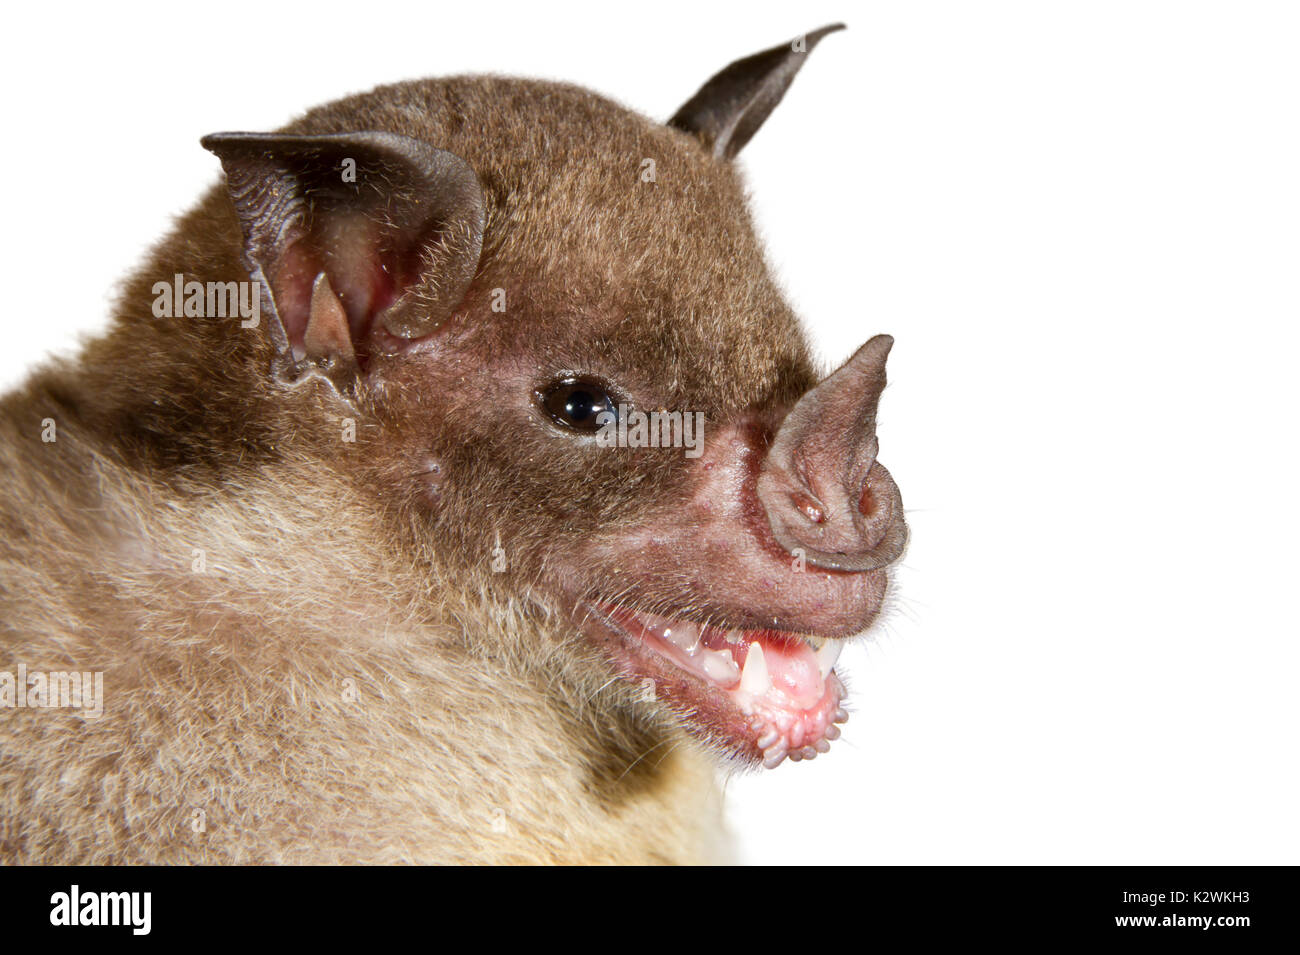 Pale spear-nosed bat (Phyllostomus discolor) portrait, isolated on white background. Stock Photo